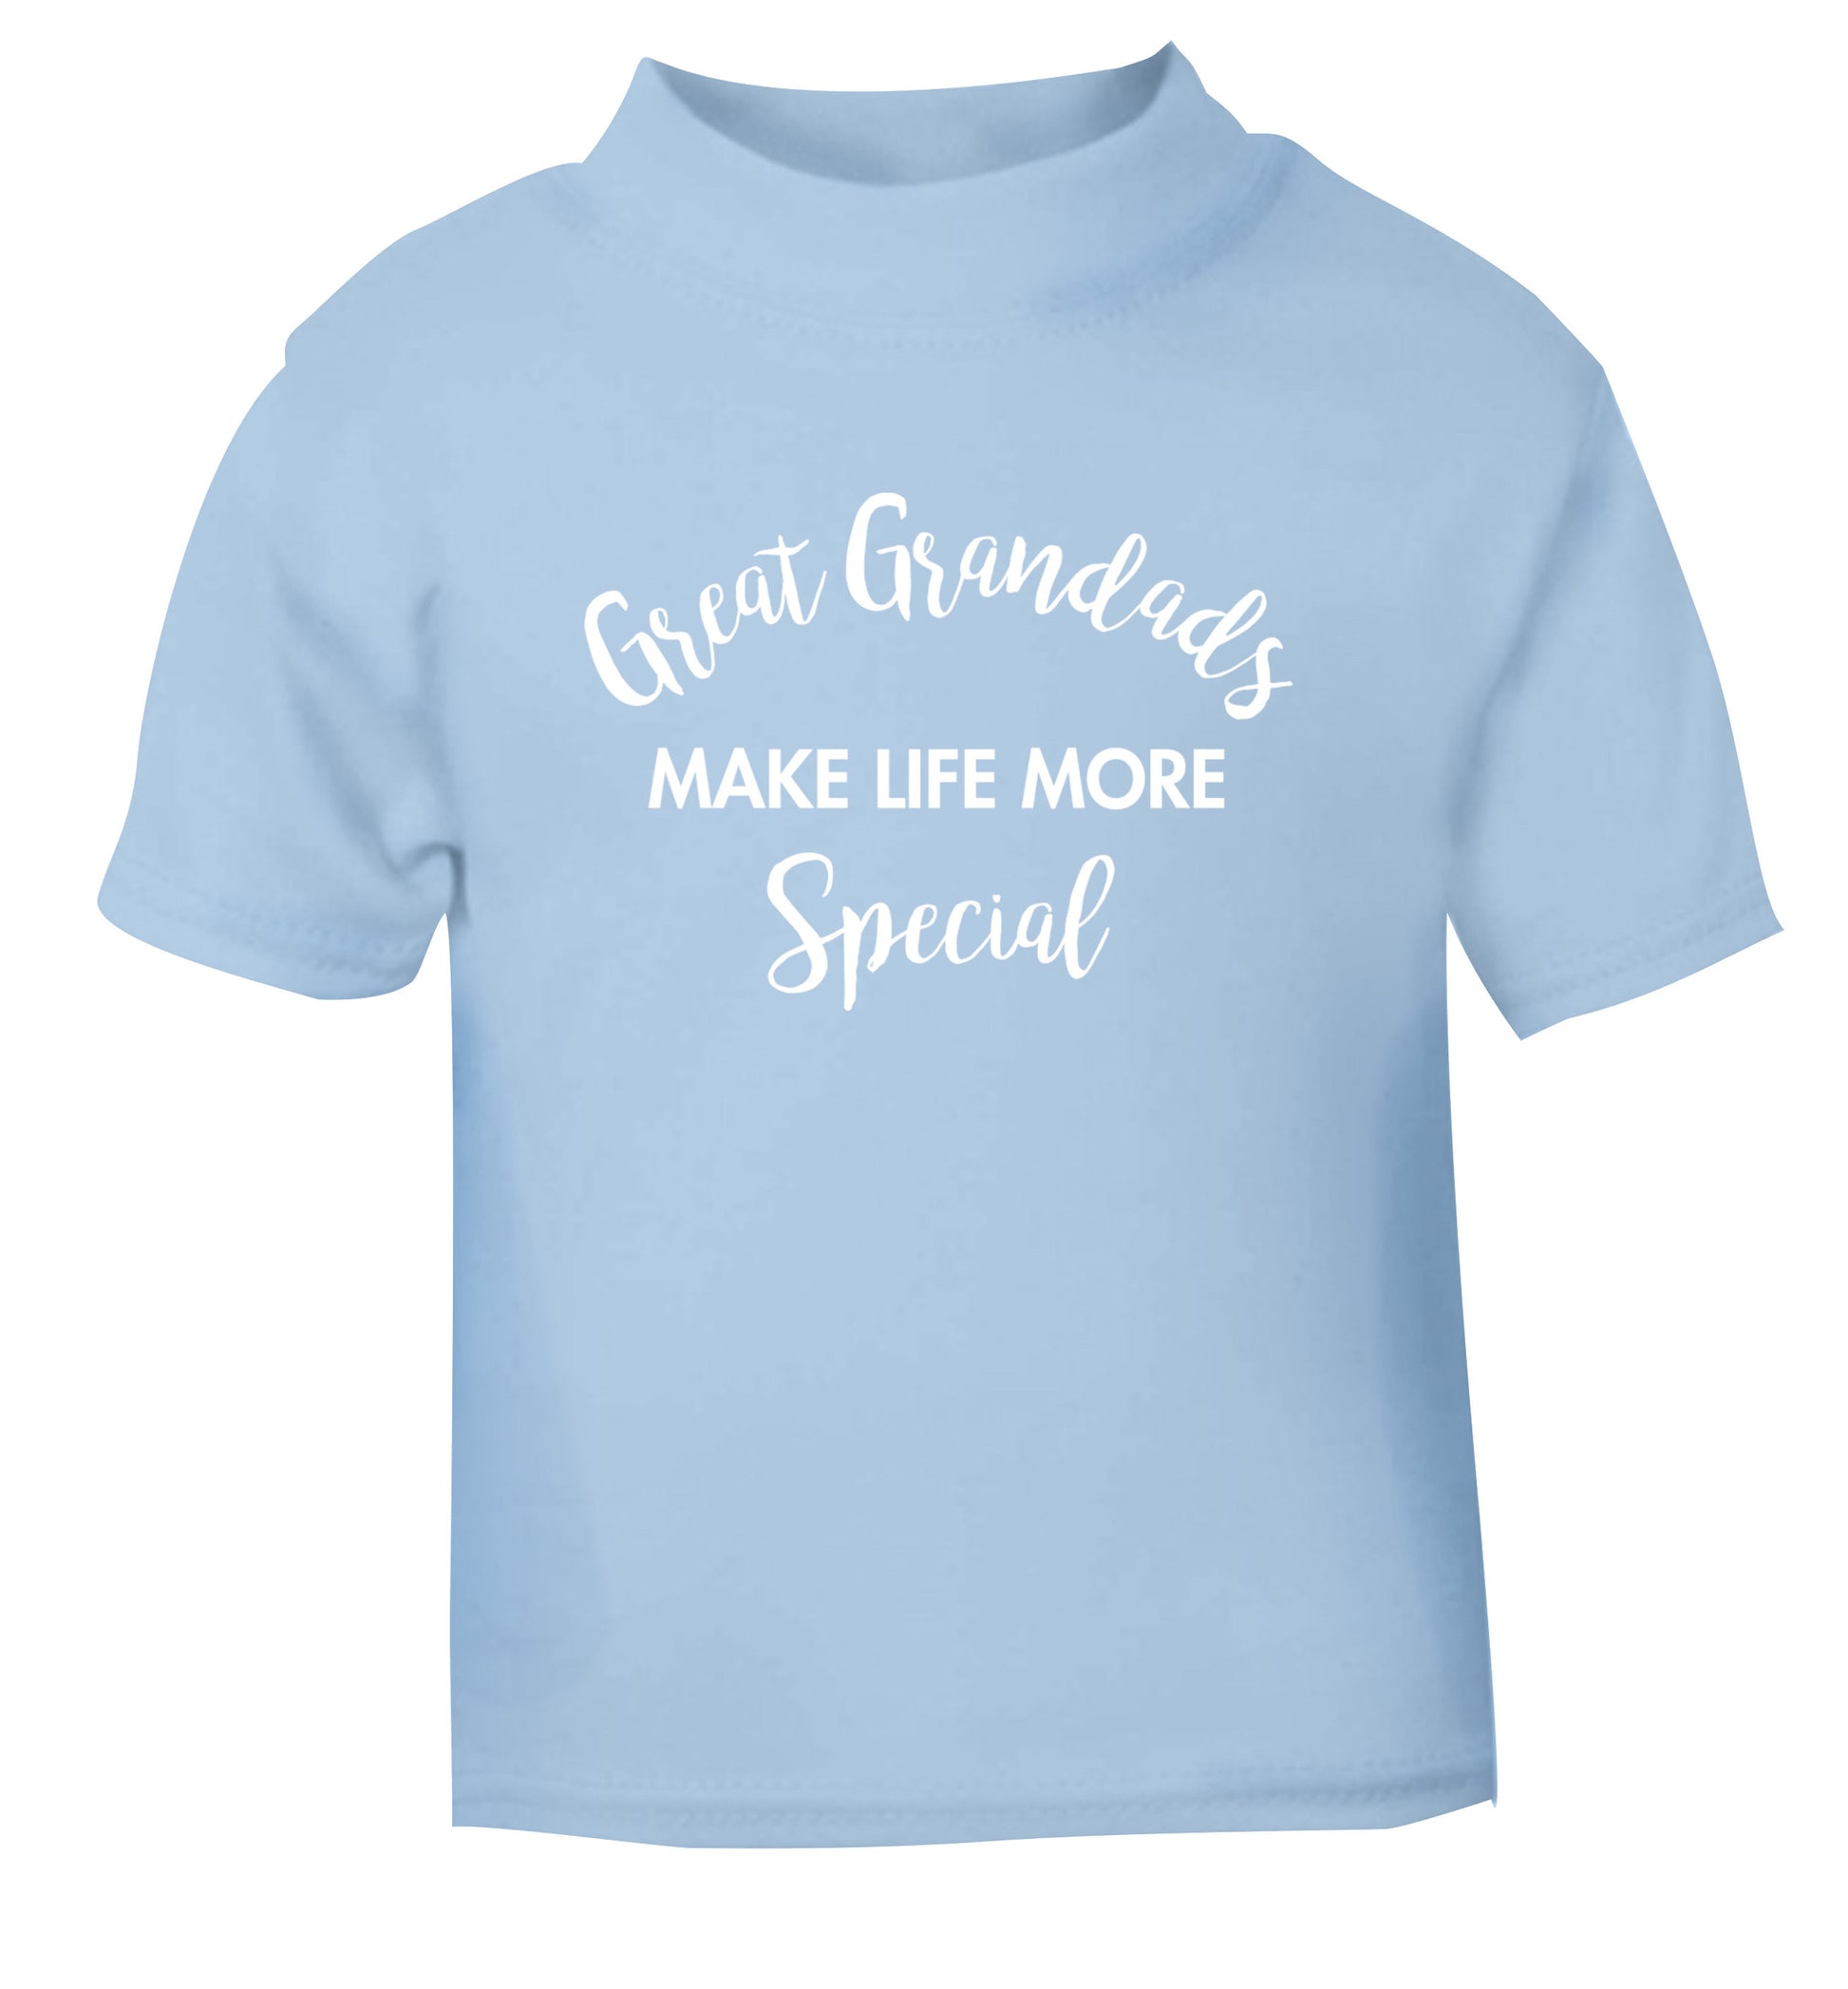 Great Grandads make life more special light blue Baby Toddler Tshirt 2 Years